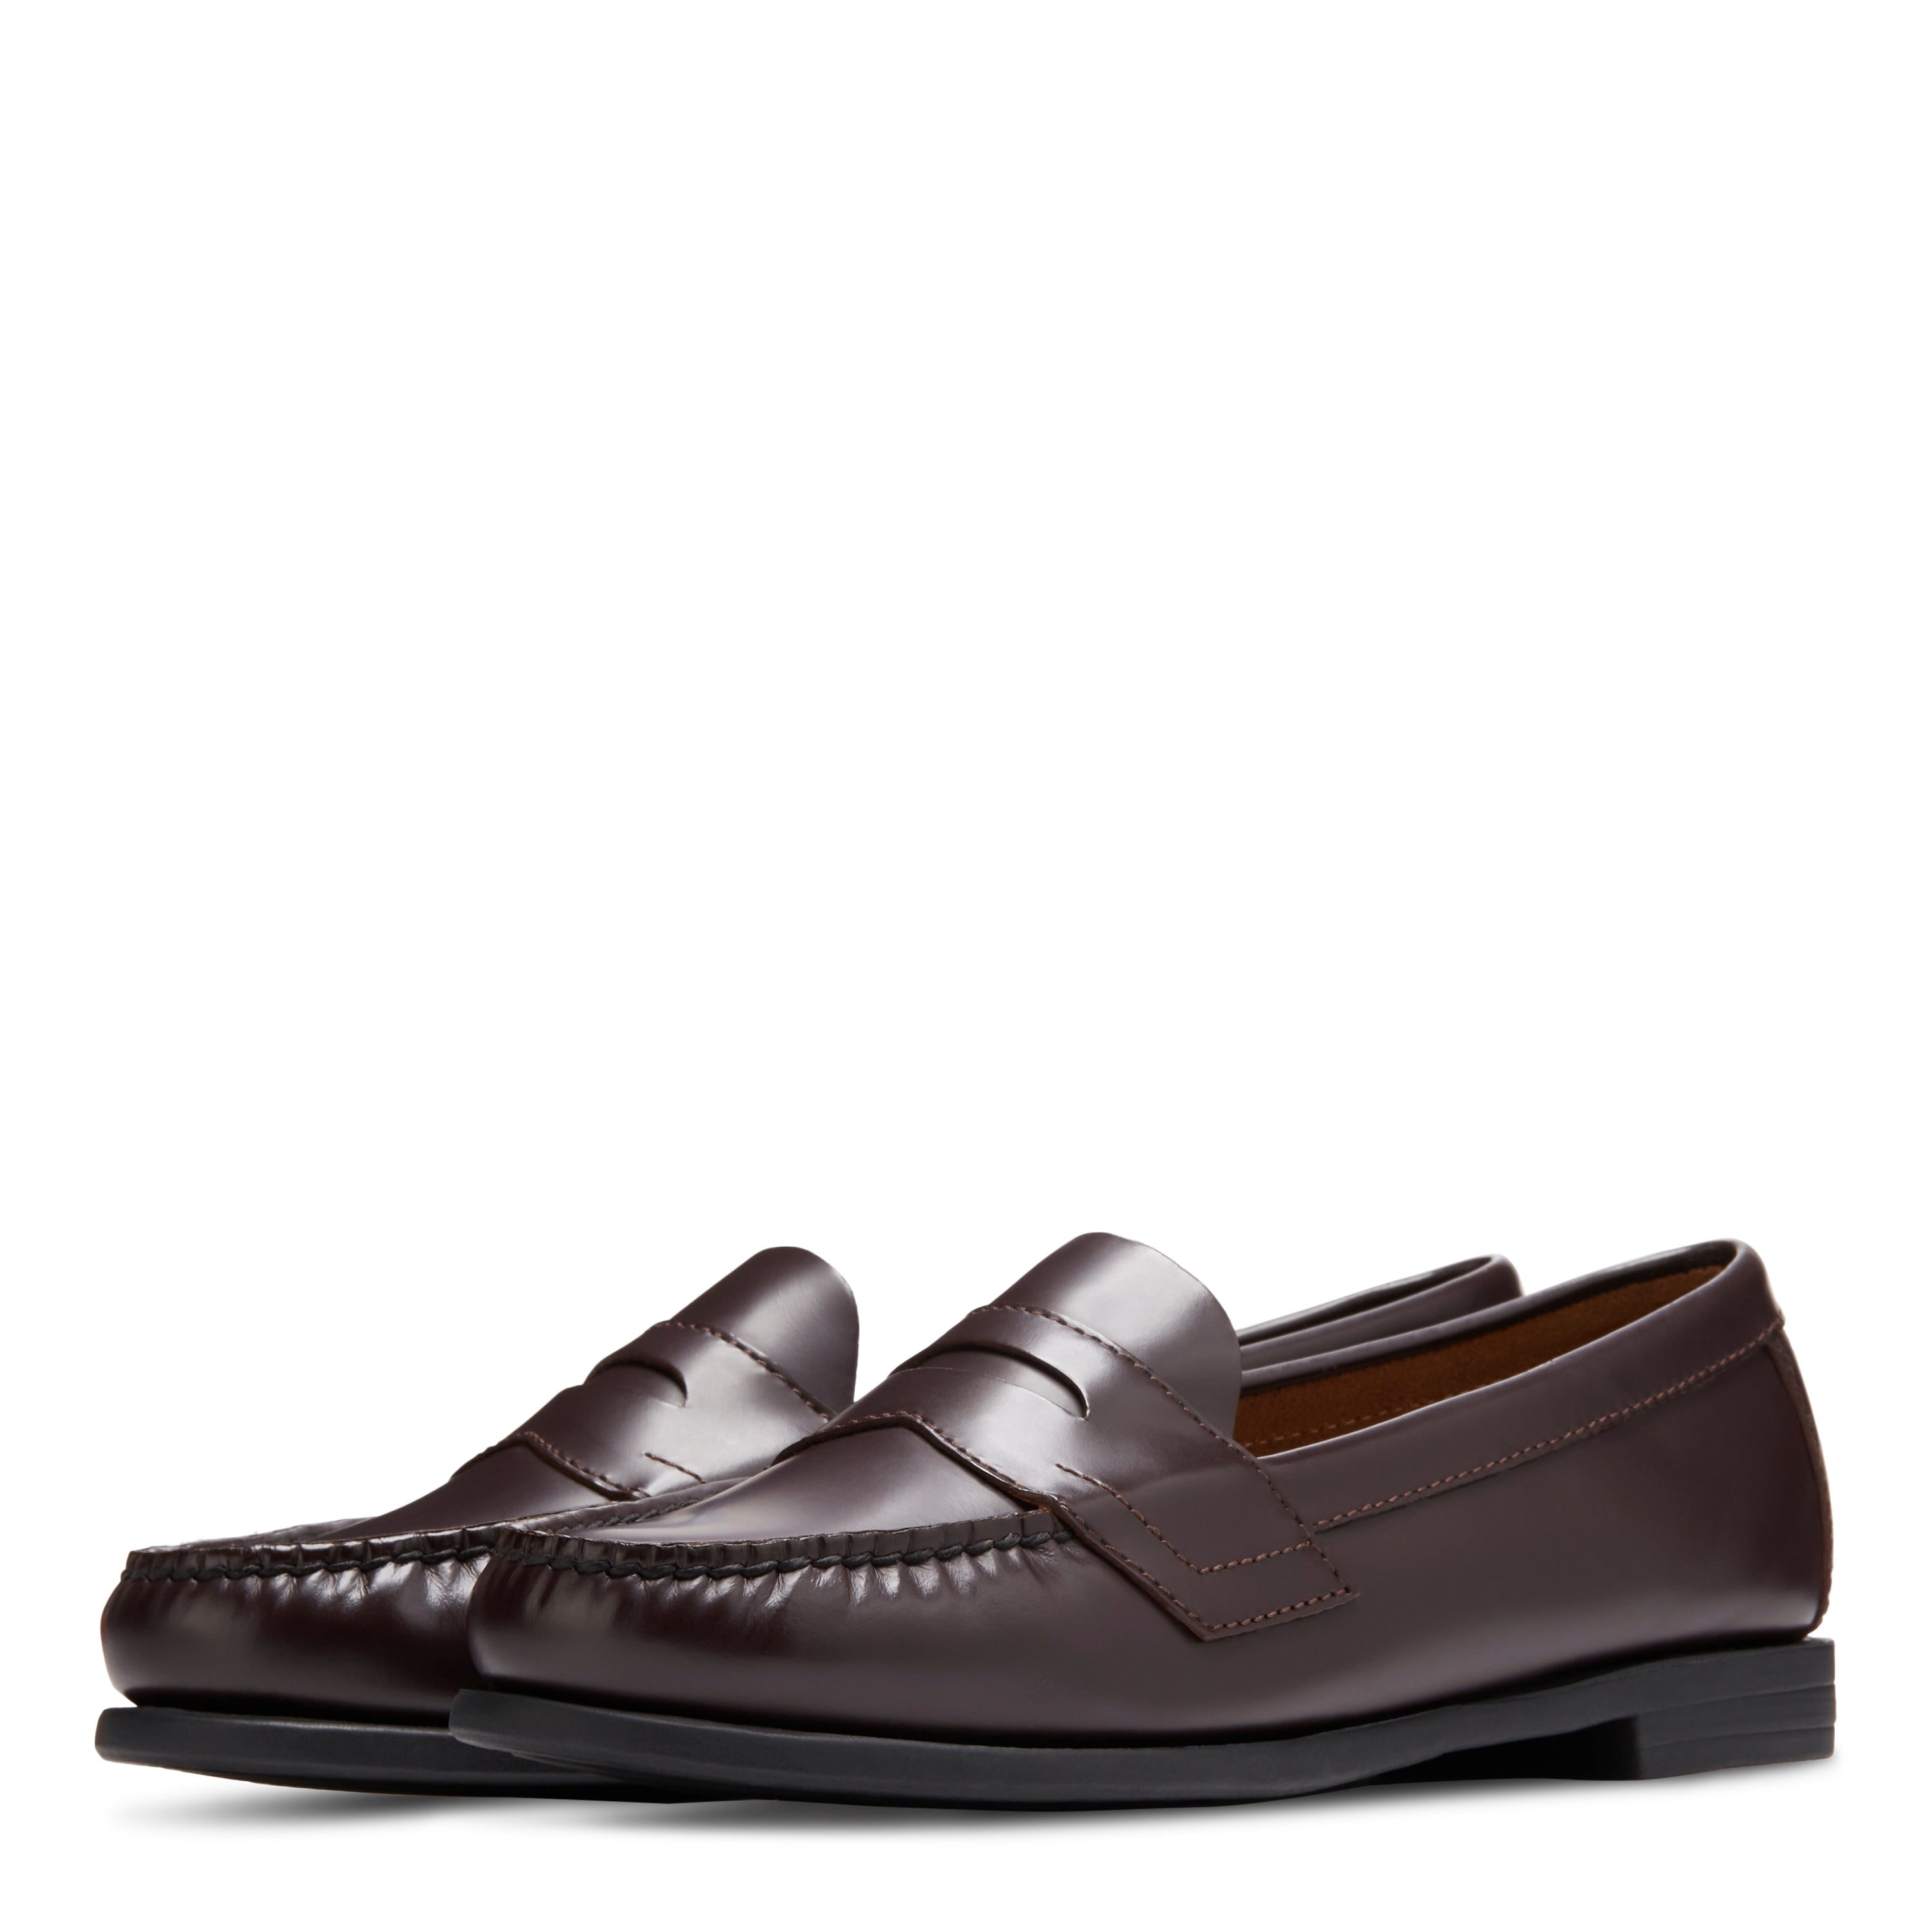 Louise et Cie Leather Loafers - Everland